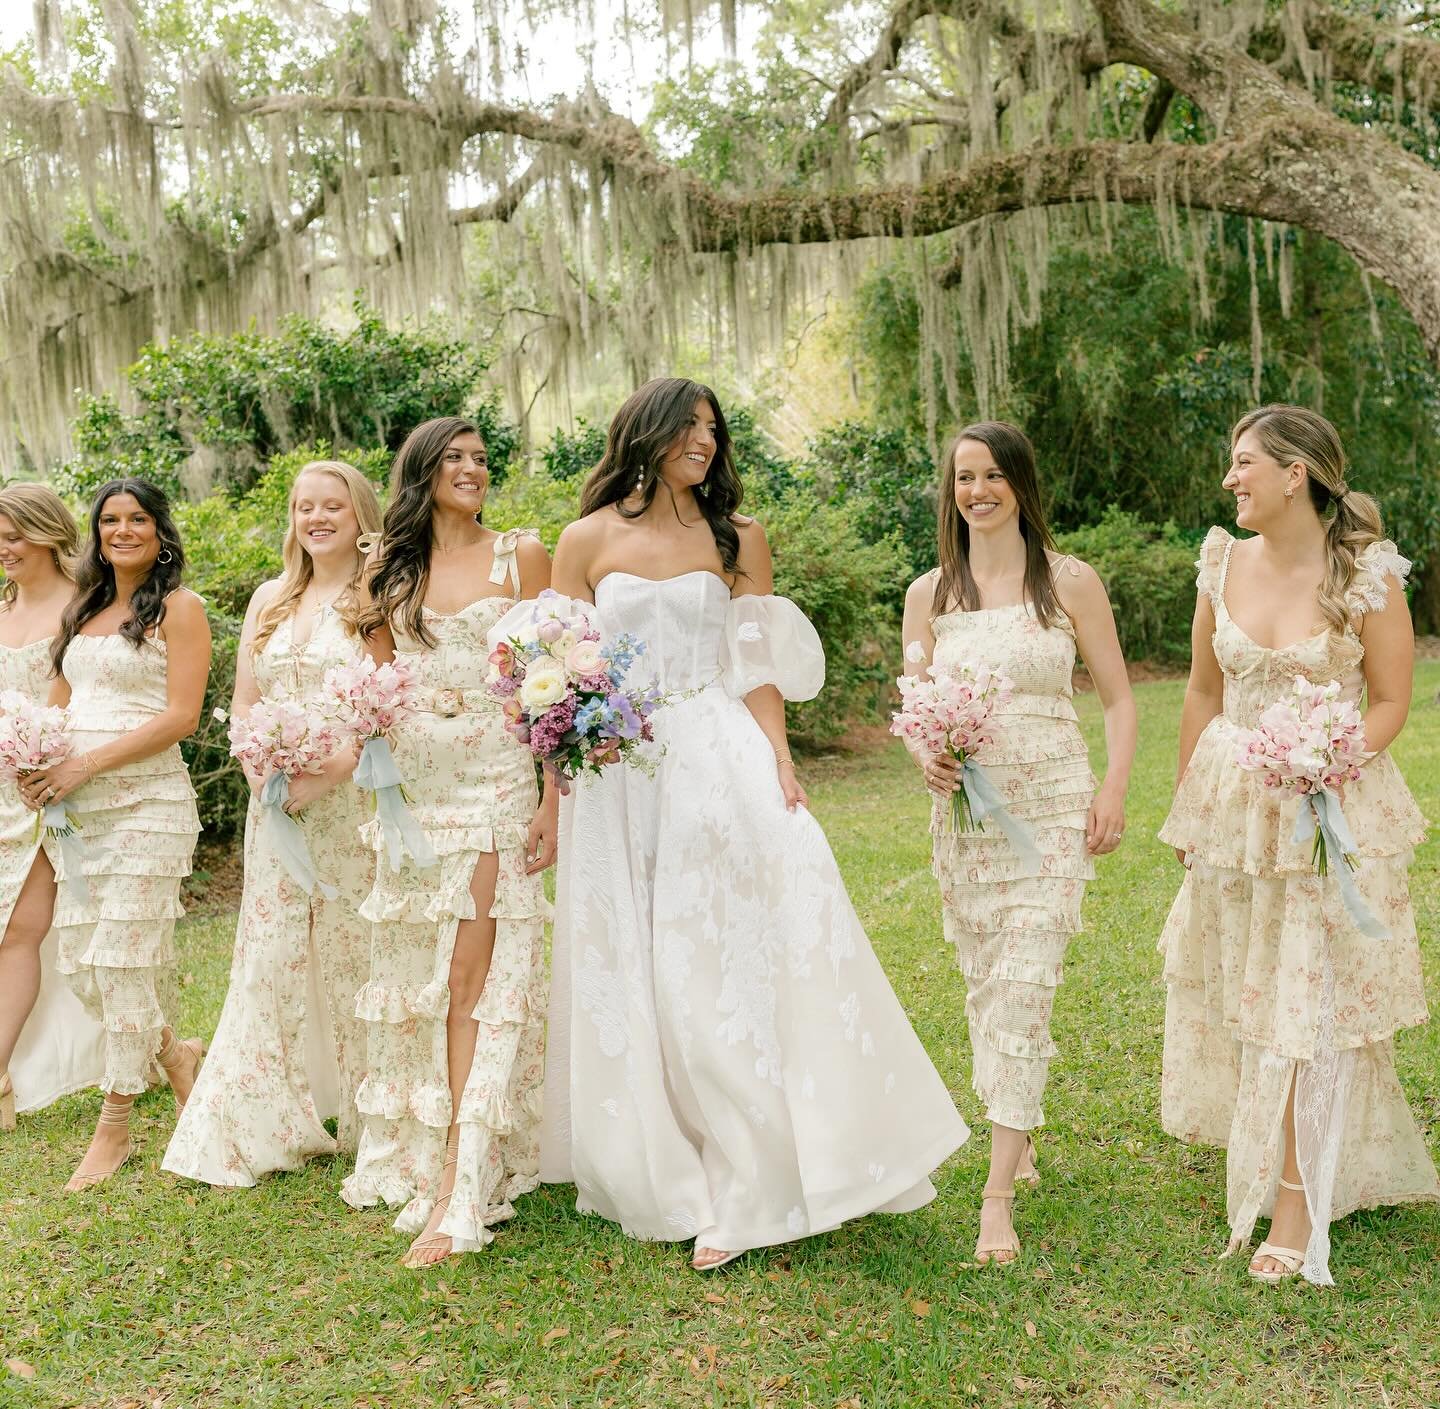 Sam &amp; her girls showing off the most perfect spring wedding vibes🌸 We&rsquo;re swooning over this beautiful day! #studiobride 

Beautiful photos by @michellescottphoto 

#springwedding #bridegoals #bridesmaids #bridesmaiddresses #springwedding #